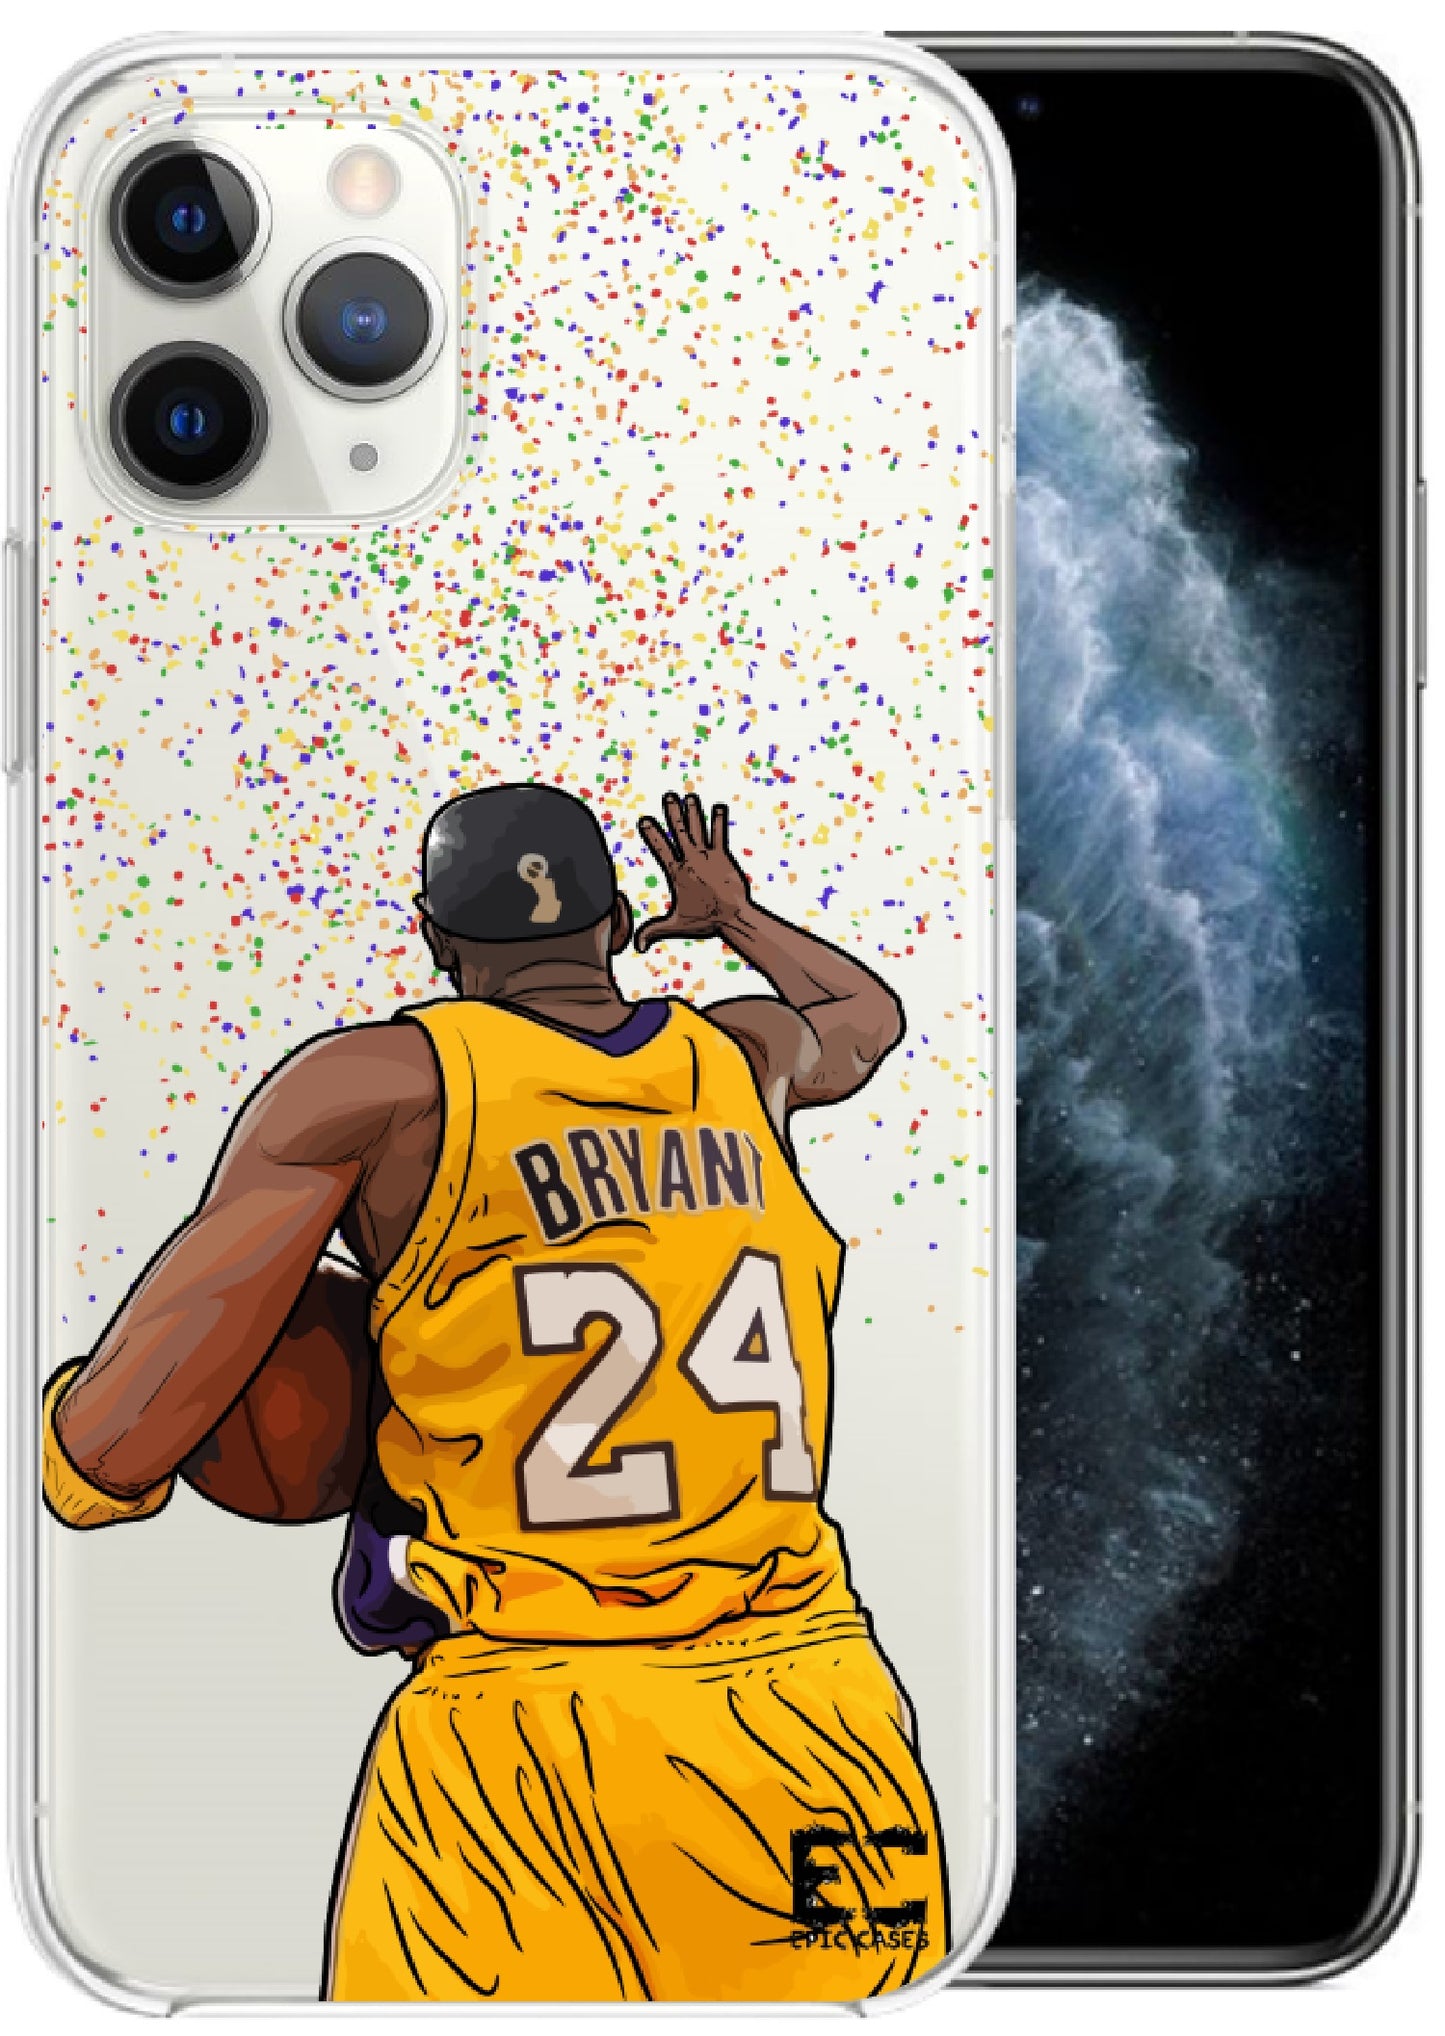 Kobe Bryant Epic Cases Ultra Slim Crystal Clear Soft Transparent TPU Case Cover Apple iPhone 6/7/8/Plus/X/XS/XS Max/XR/11/11 Pro/11 Pro Max